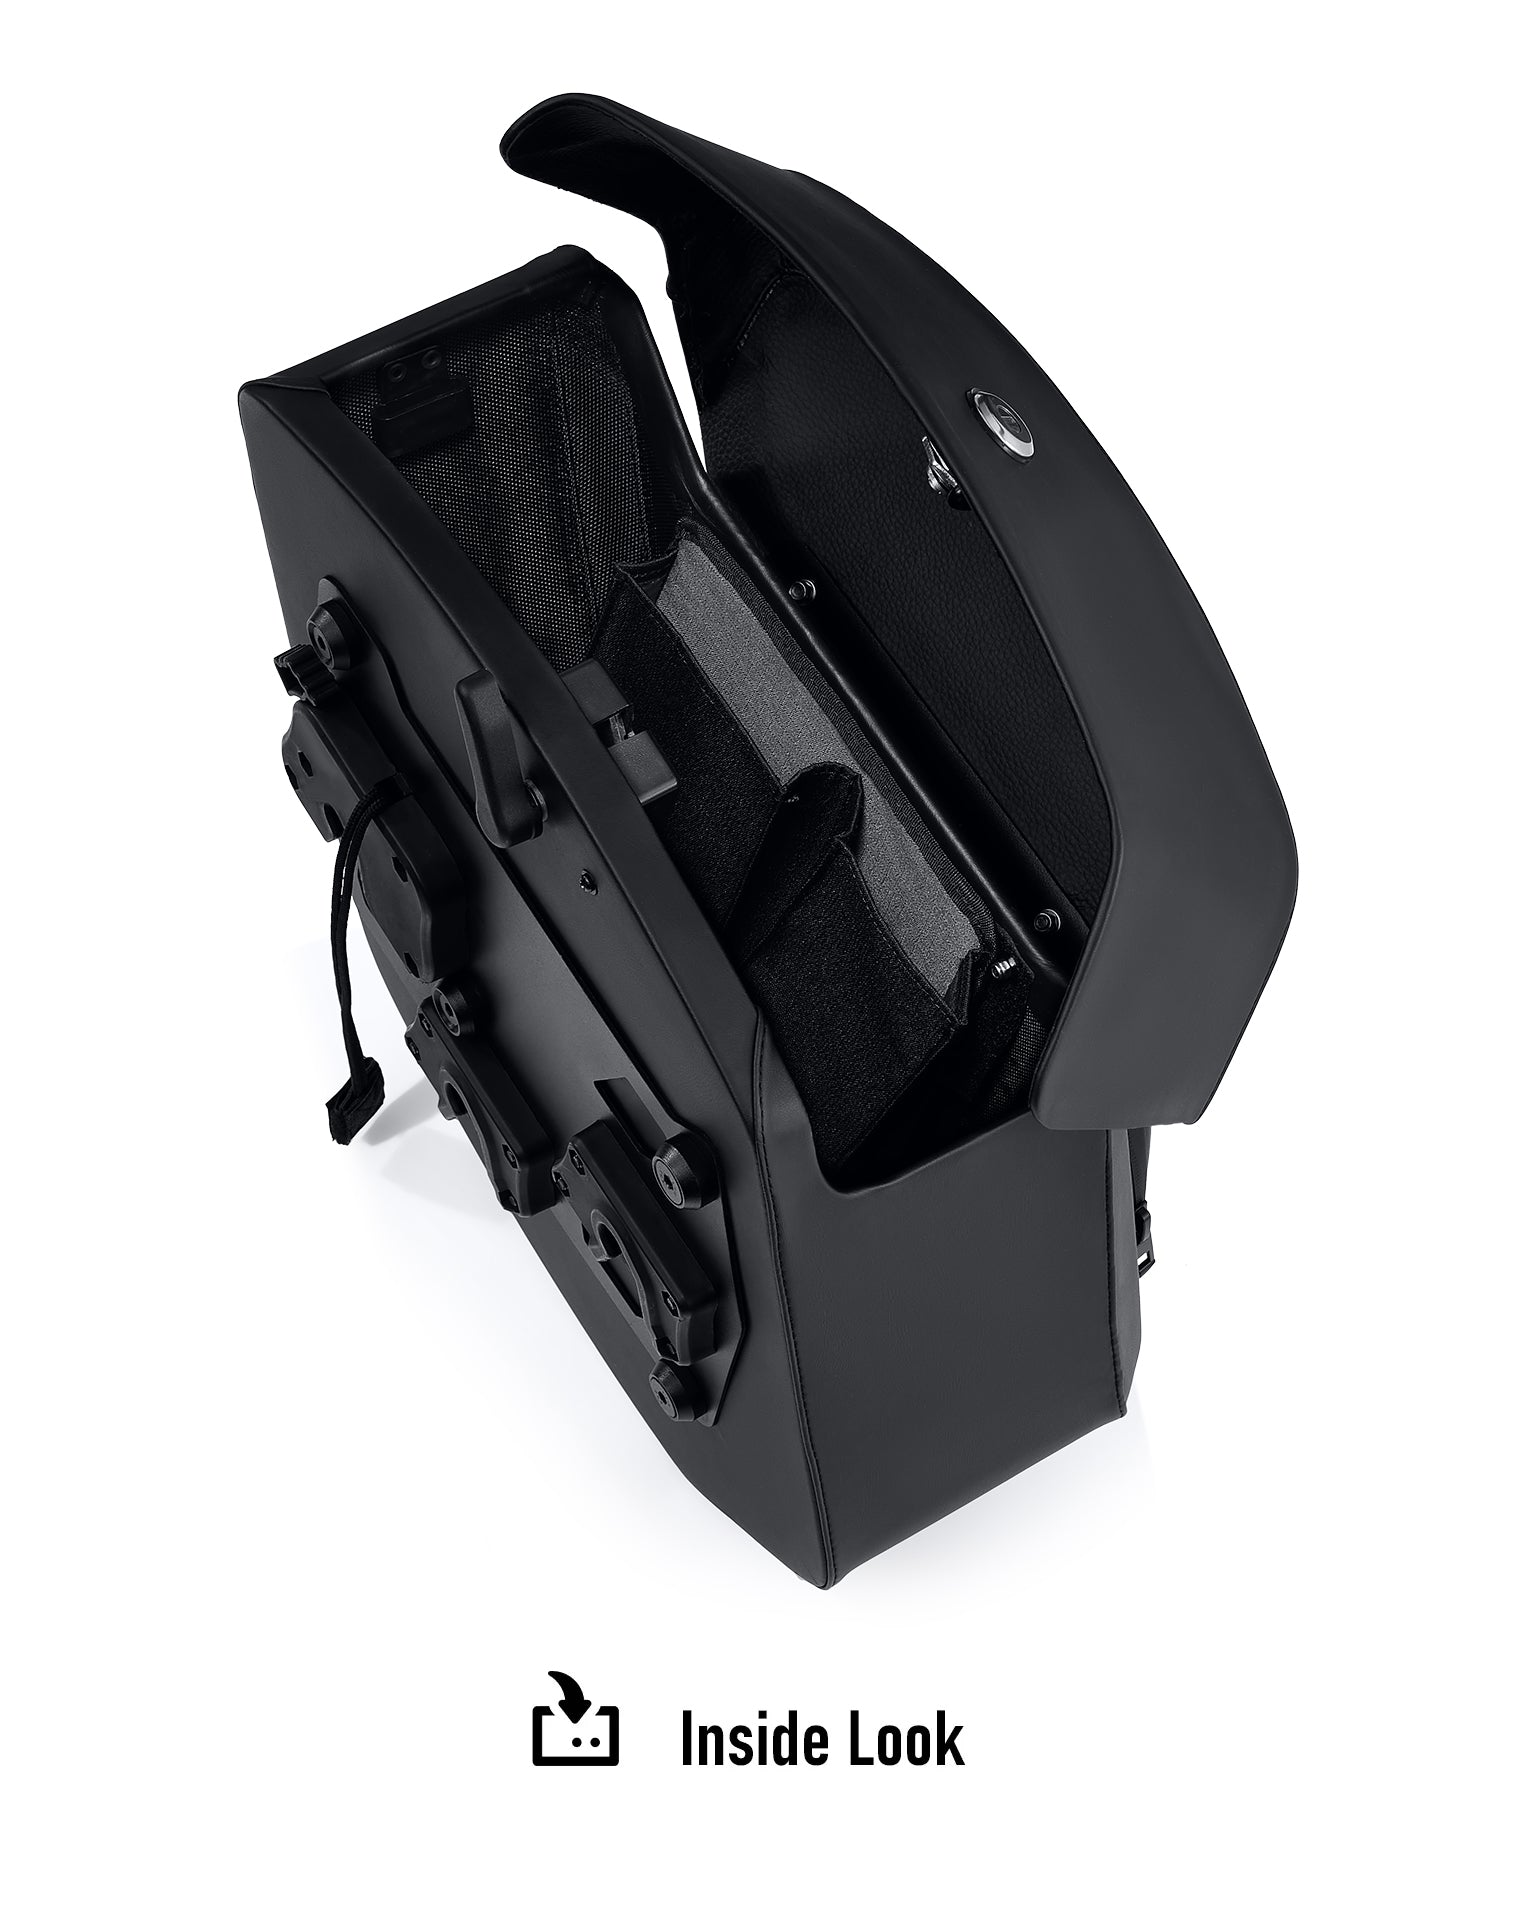 28L - Pantheon Medium Quick-Mount Motorcycle Saddlebags For Harley Sportster 1200 Low XL1200L Inside Look